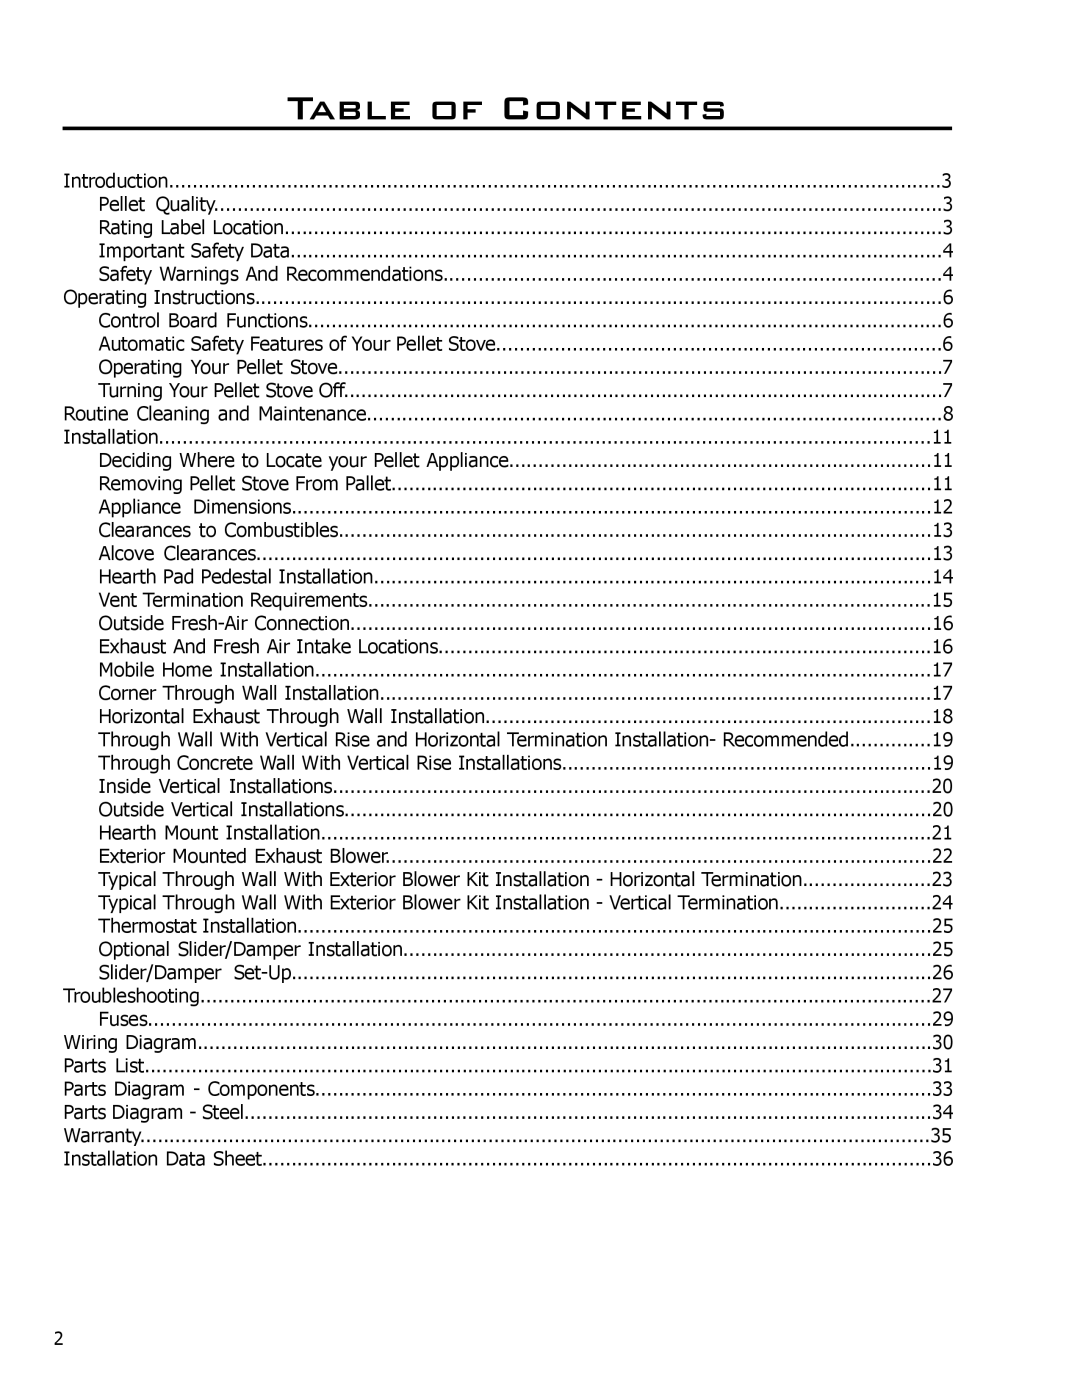 Enviro C-10608 owner manual Table of Contents 